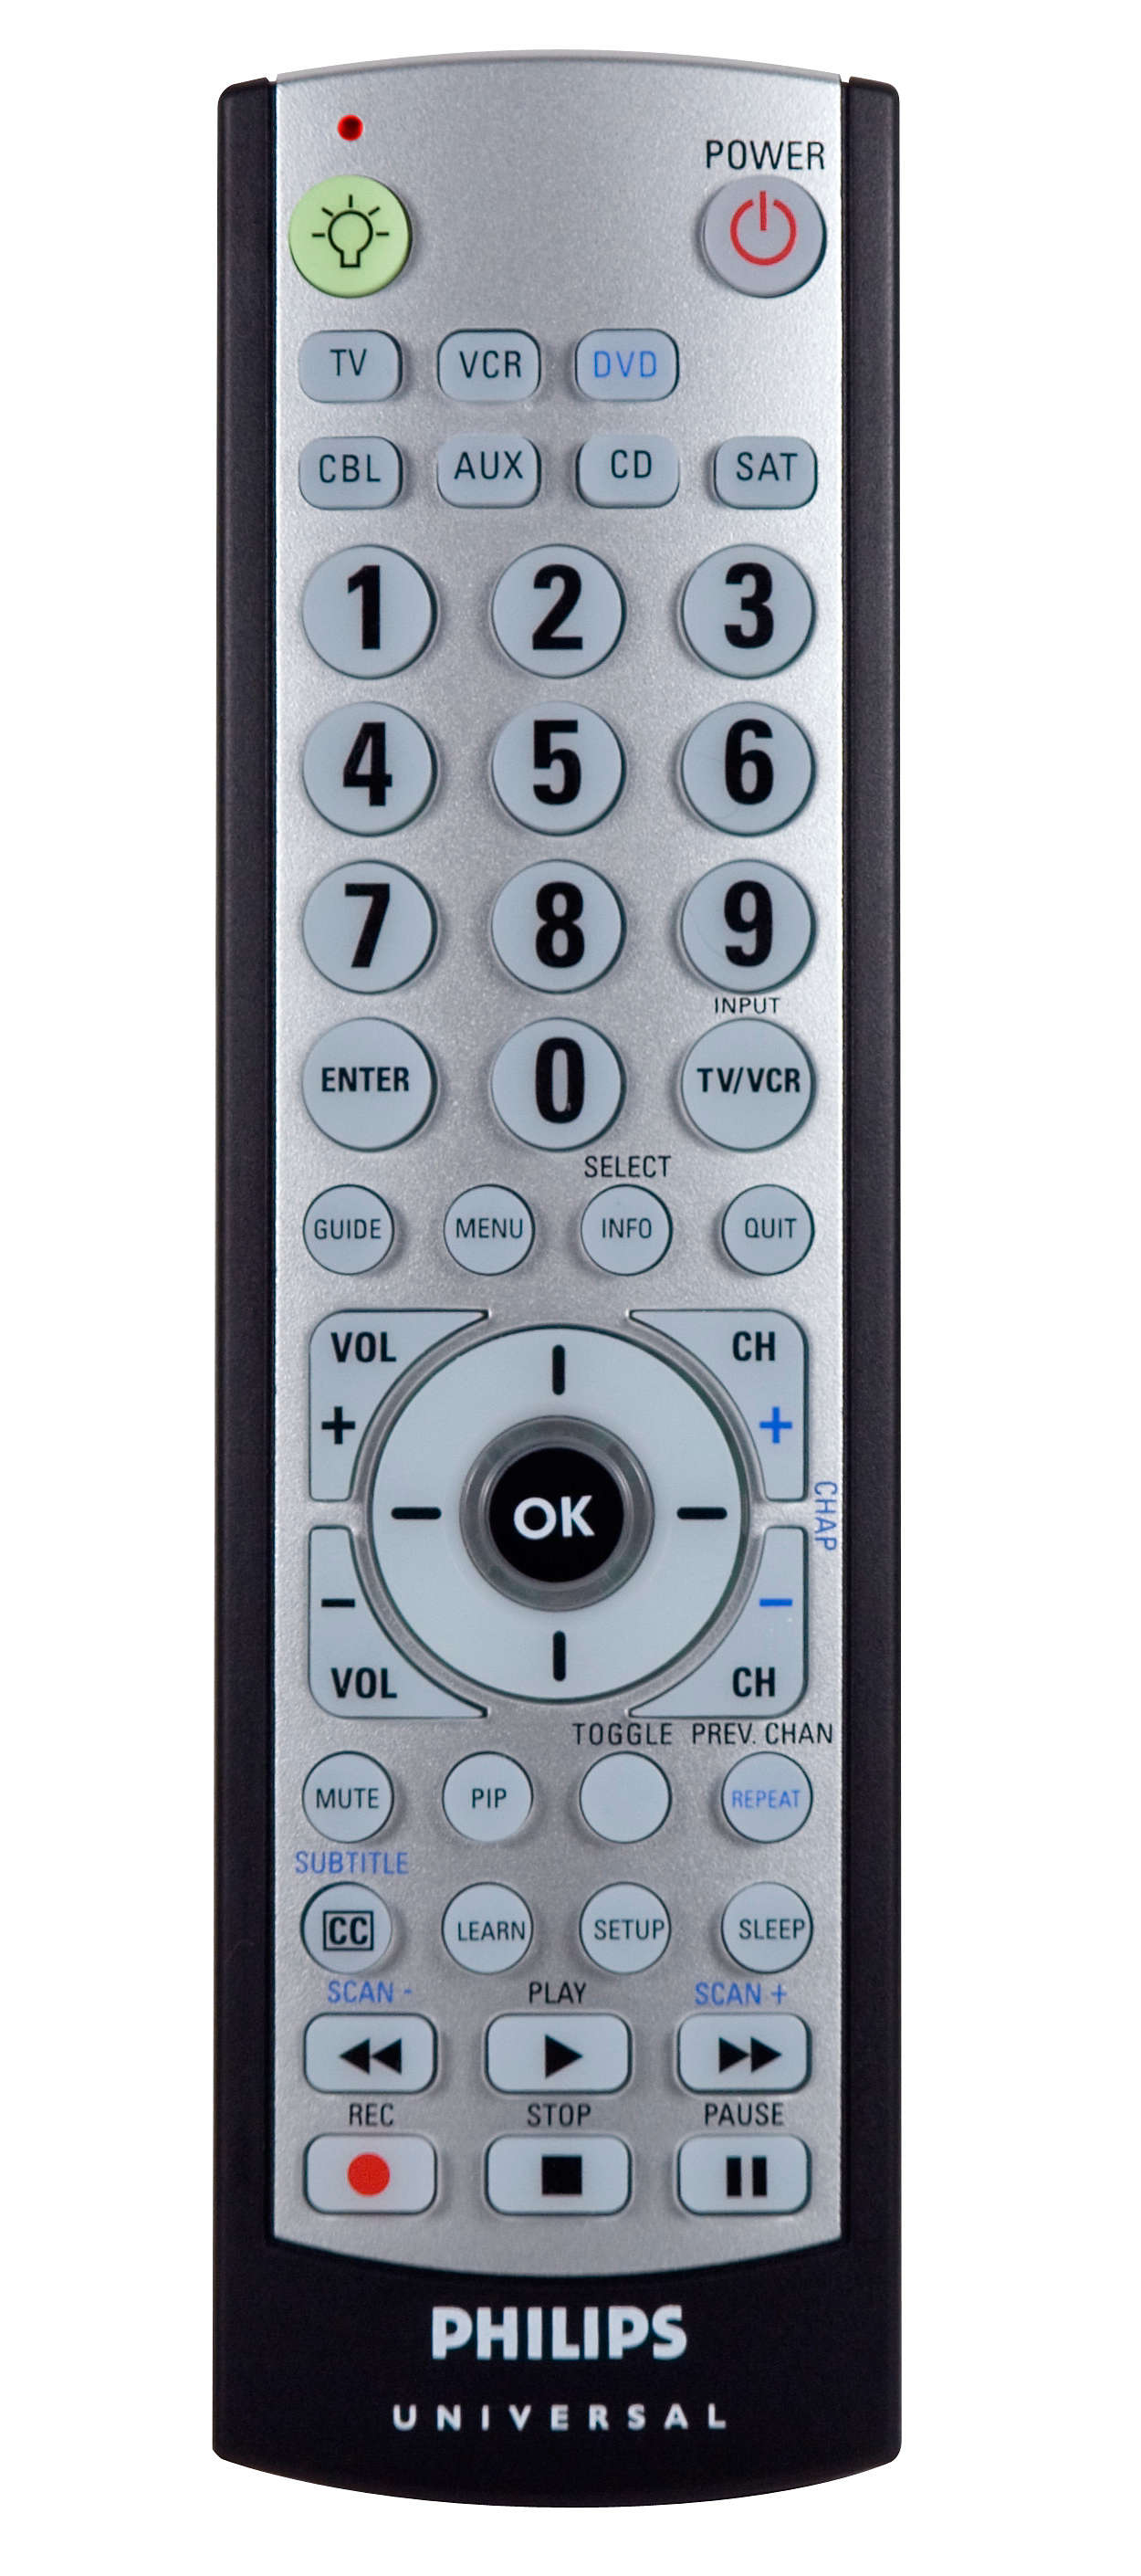 7 device remote with full back lighting